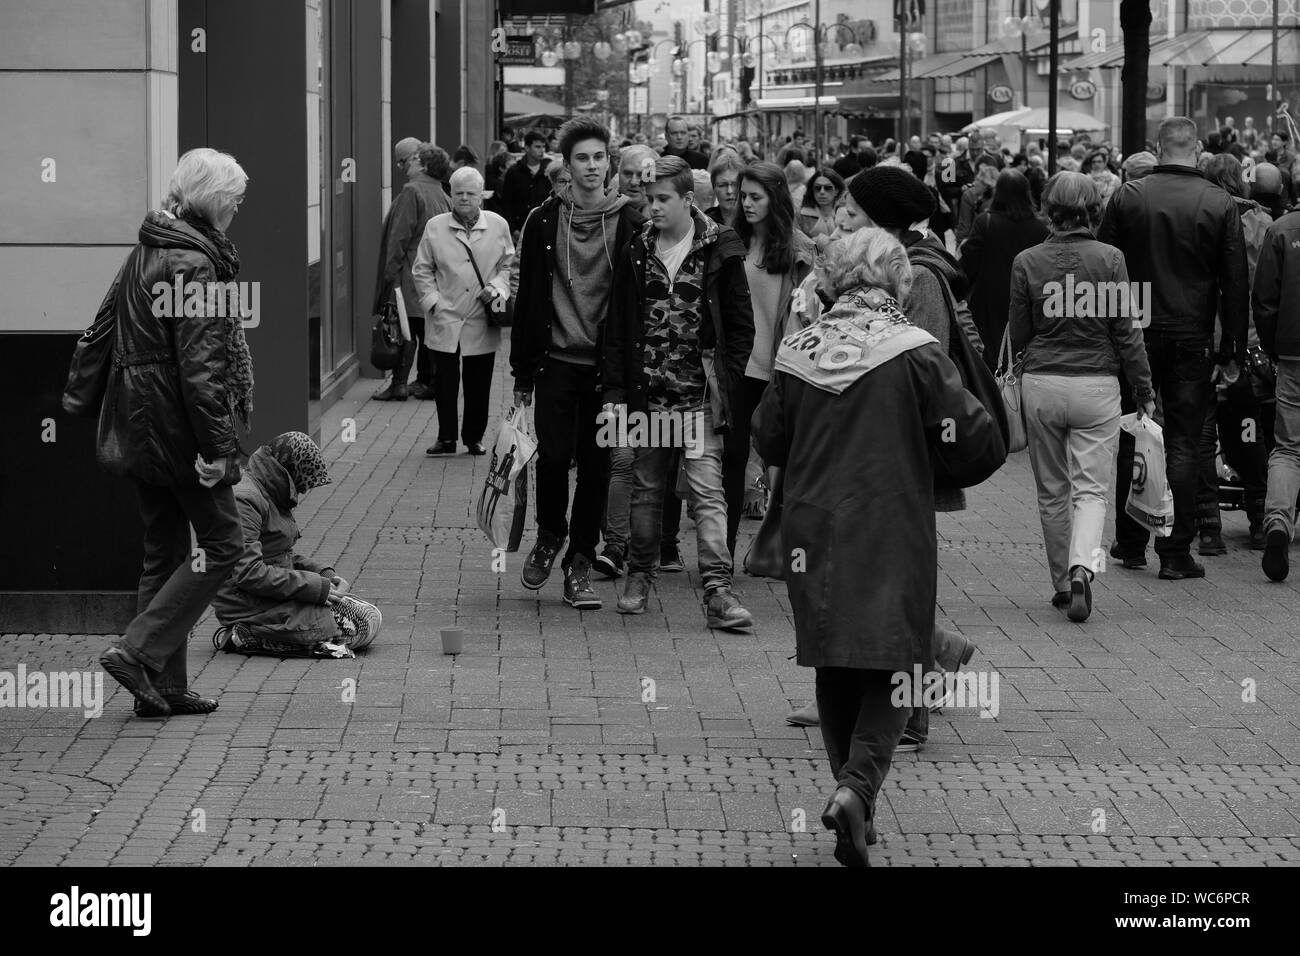 Ignoring The Crowd Black and White Stock Photos & Images - Alamy